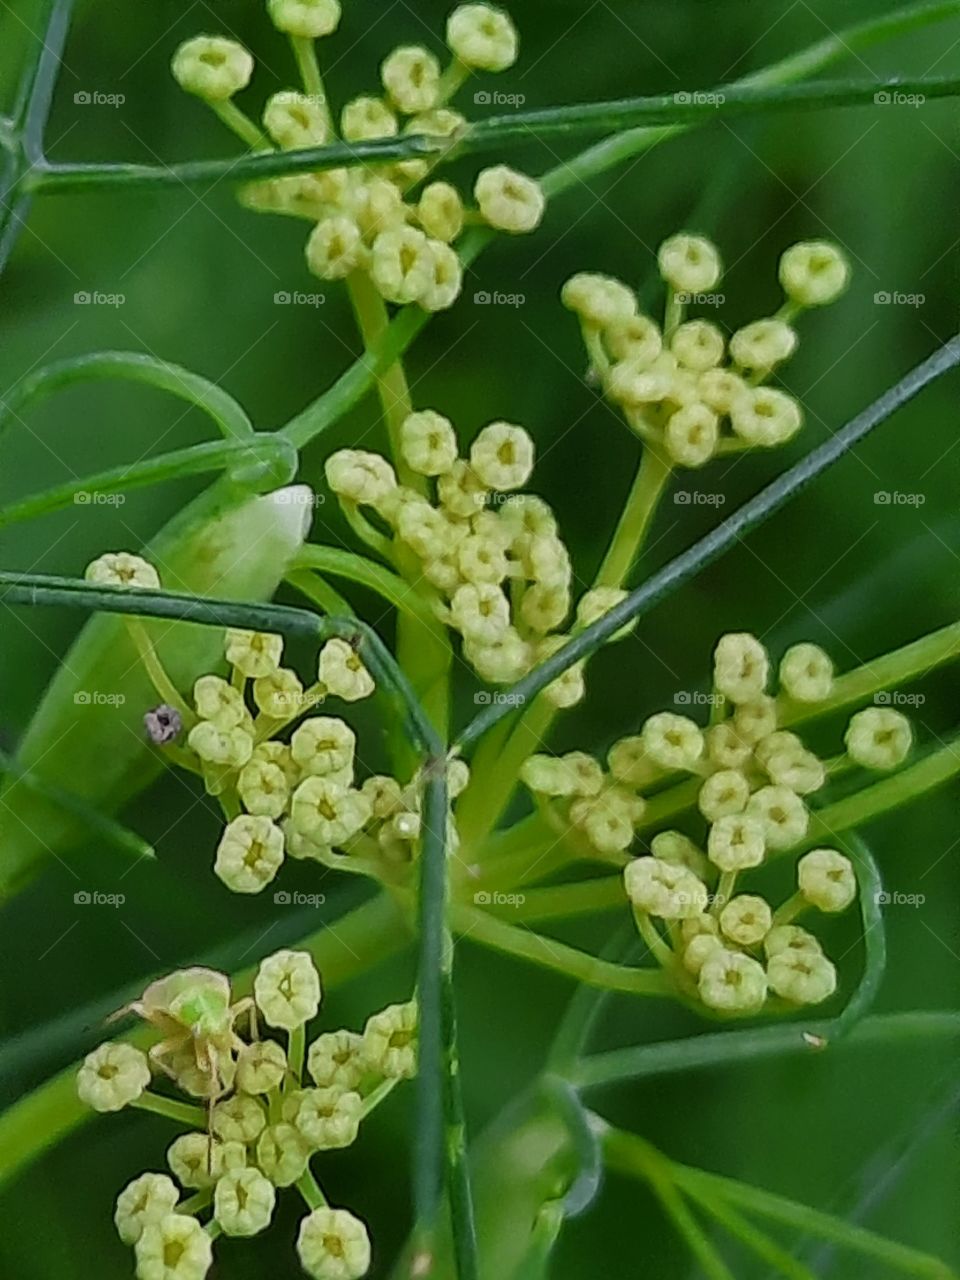 close-up of the dill flower buds